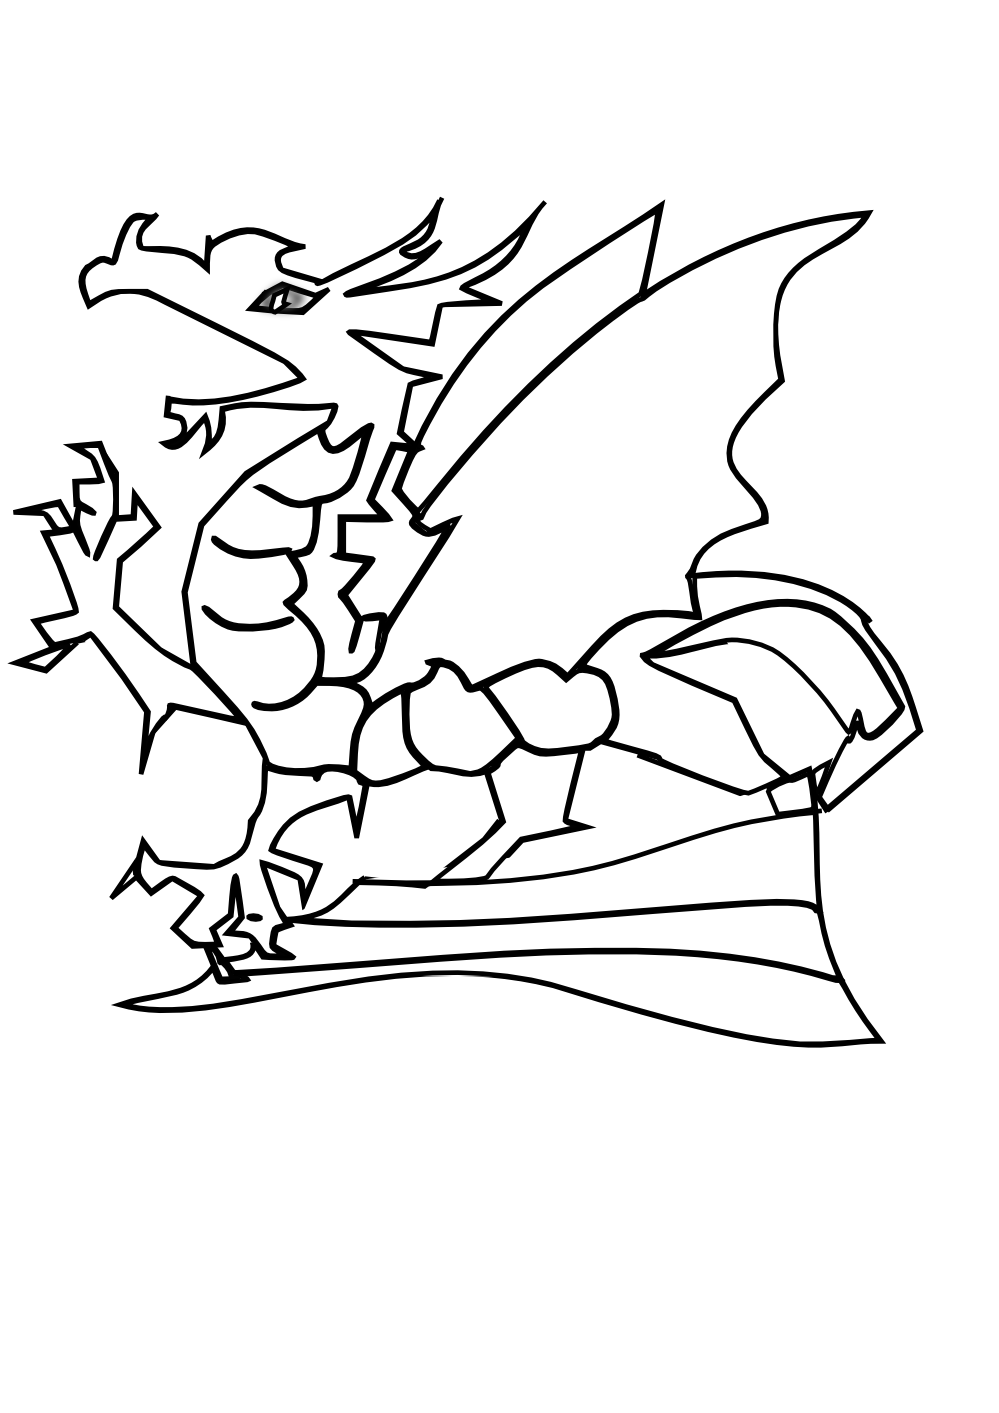 White Dragon clipart #8, Download drawings